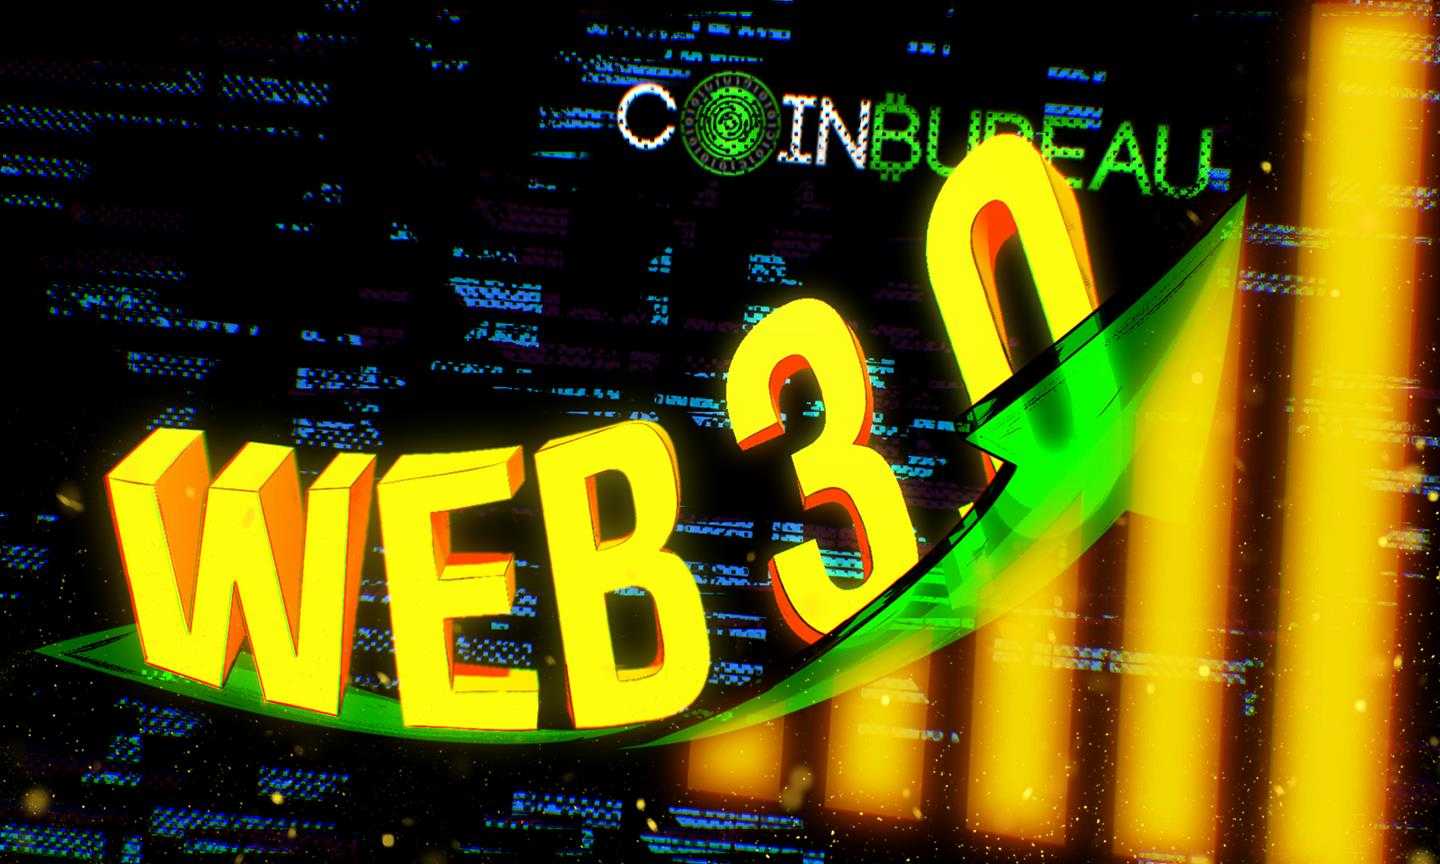 What is Web 3.0? Why It Has Insane Potential!